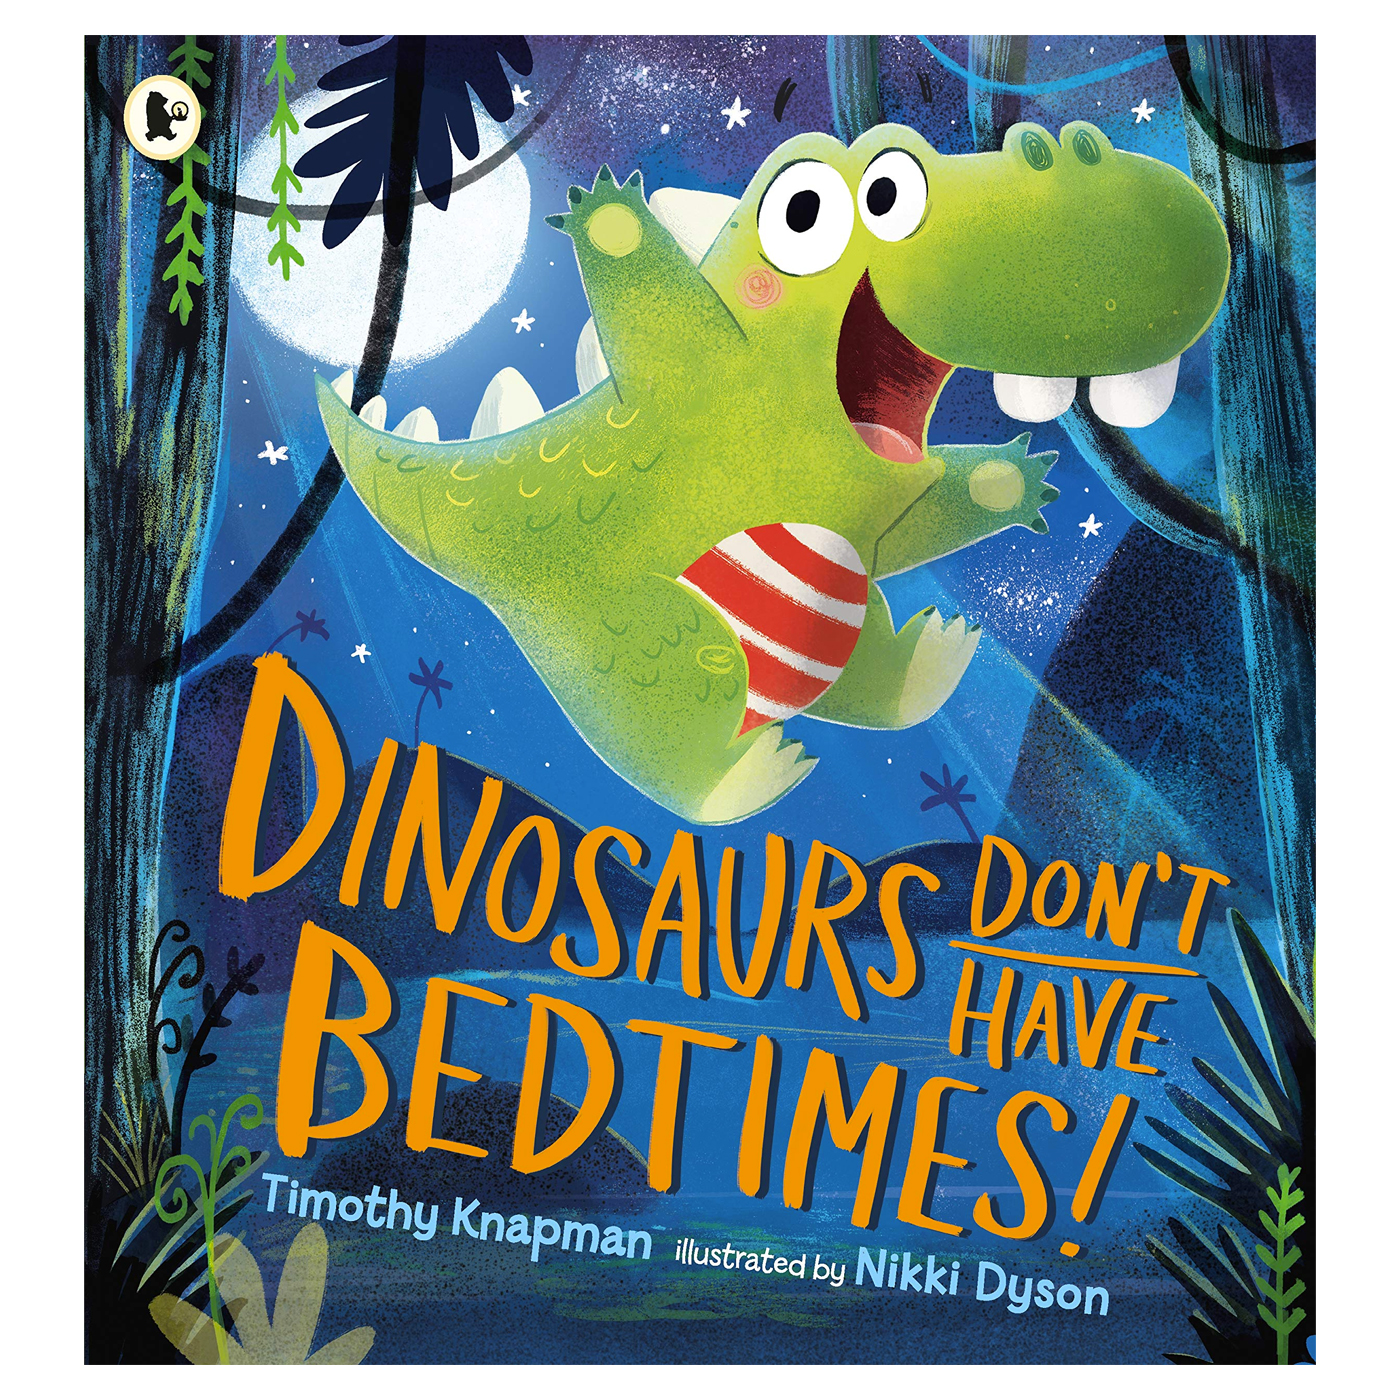  Dinosaurs Don't Have Bedtimes!